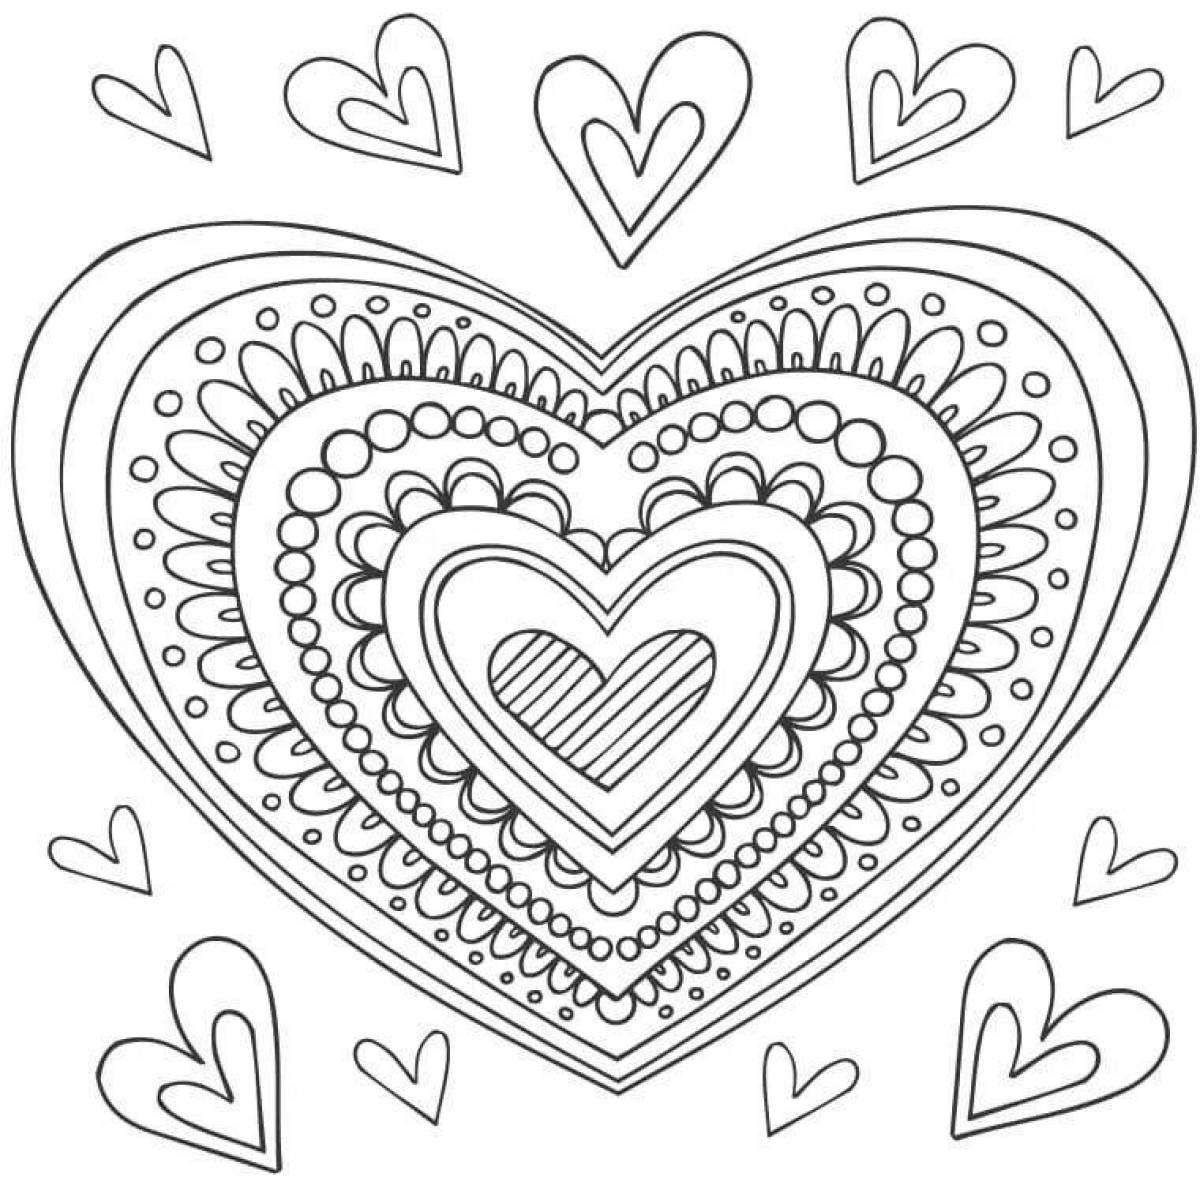 Delightful coloring book for girls with hearts